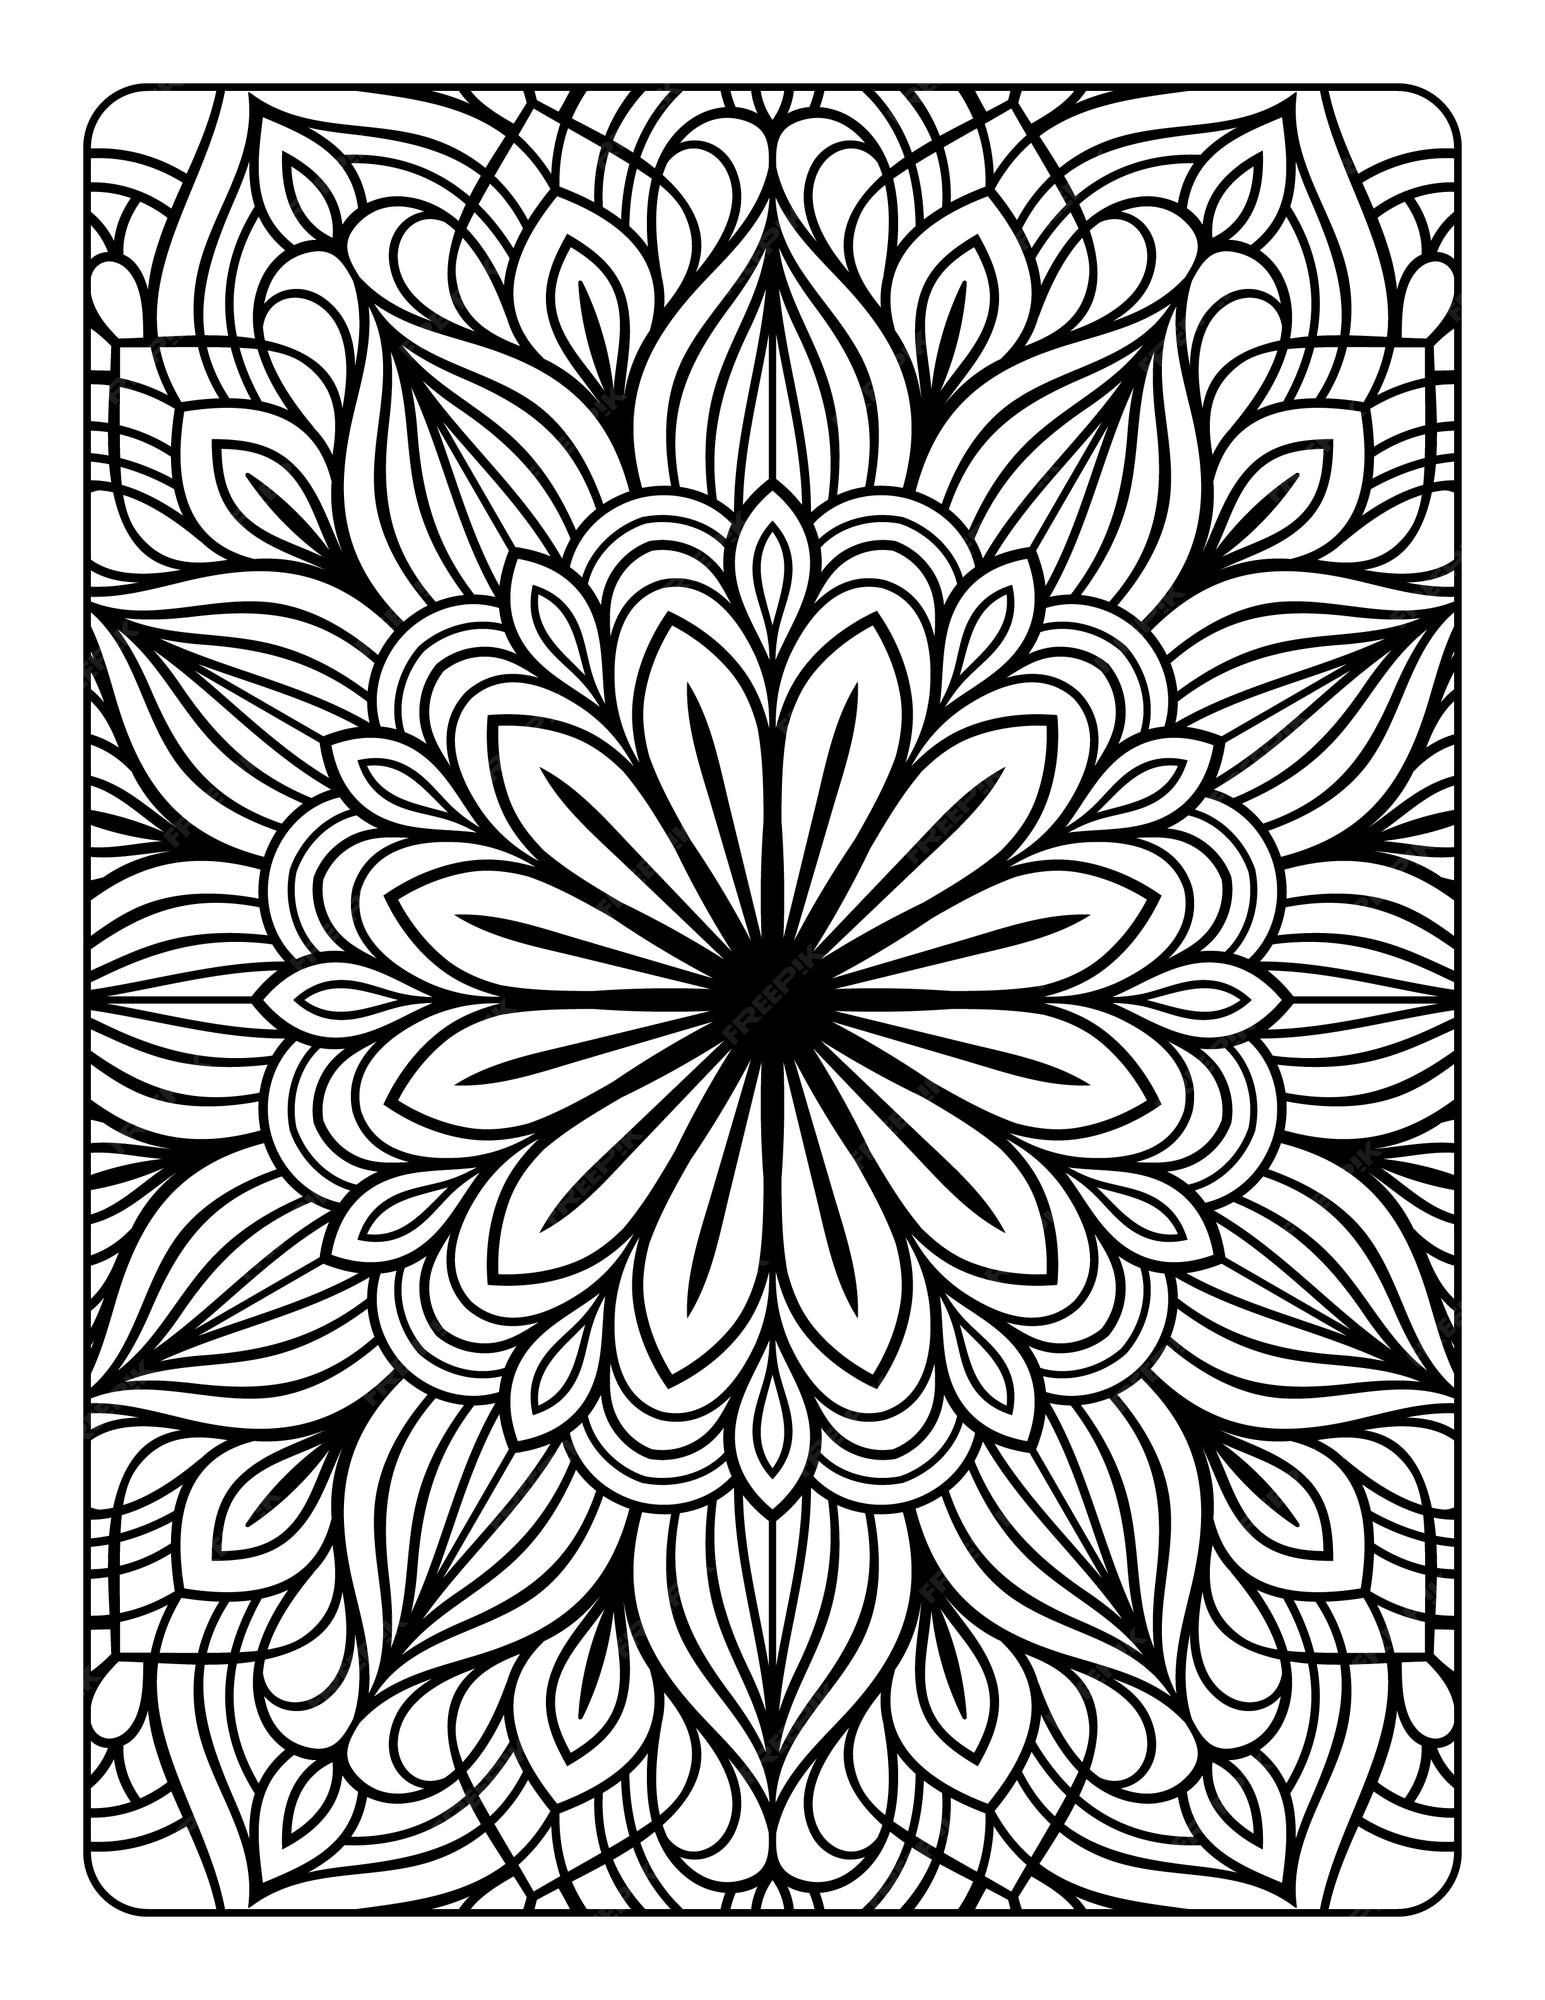 Premium vector mandala floral pattern coloring page for adults relaxation mandala coloring pages